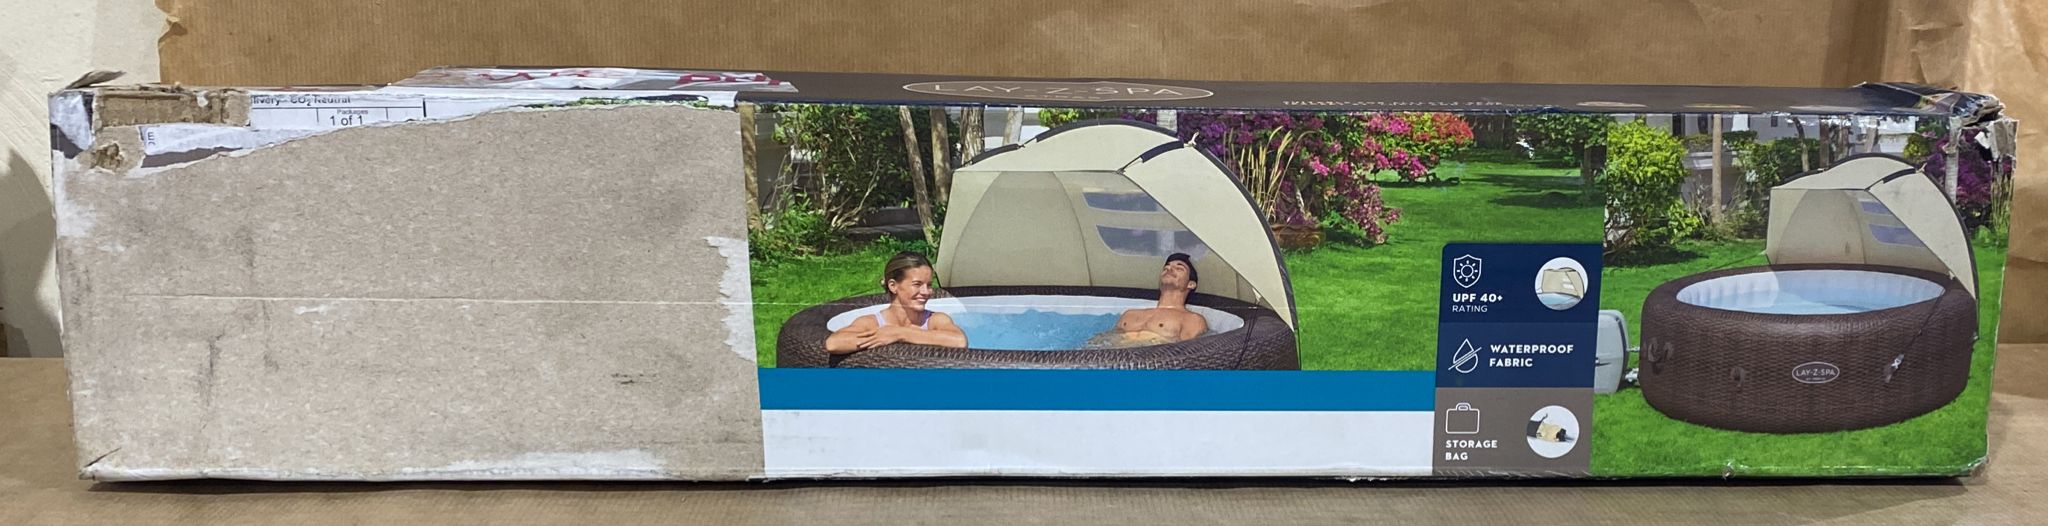 Lay-Z-Spa Canopy Dome for Extra Privacy 7110